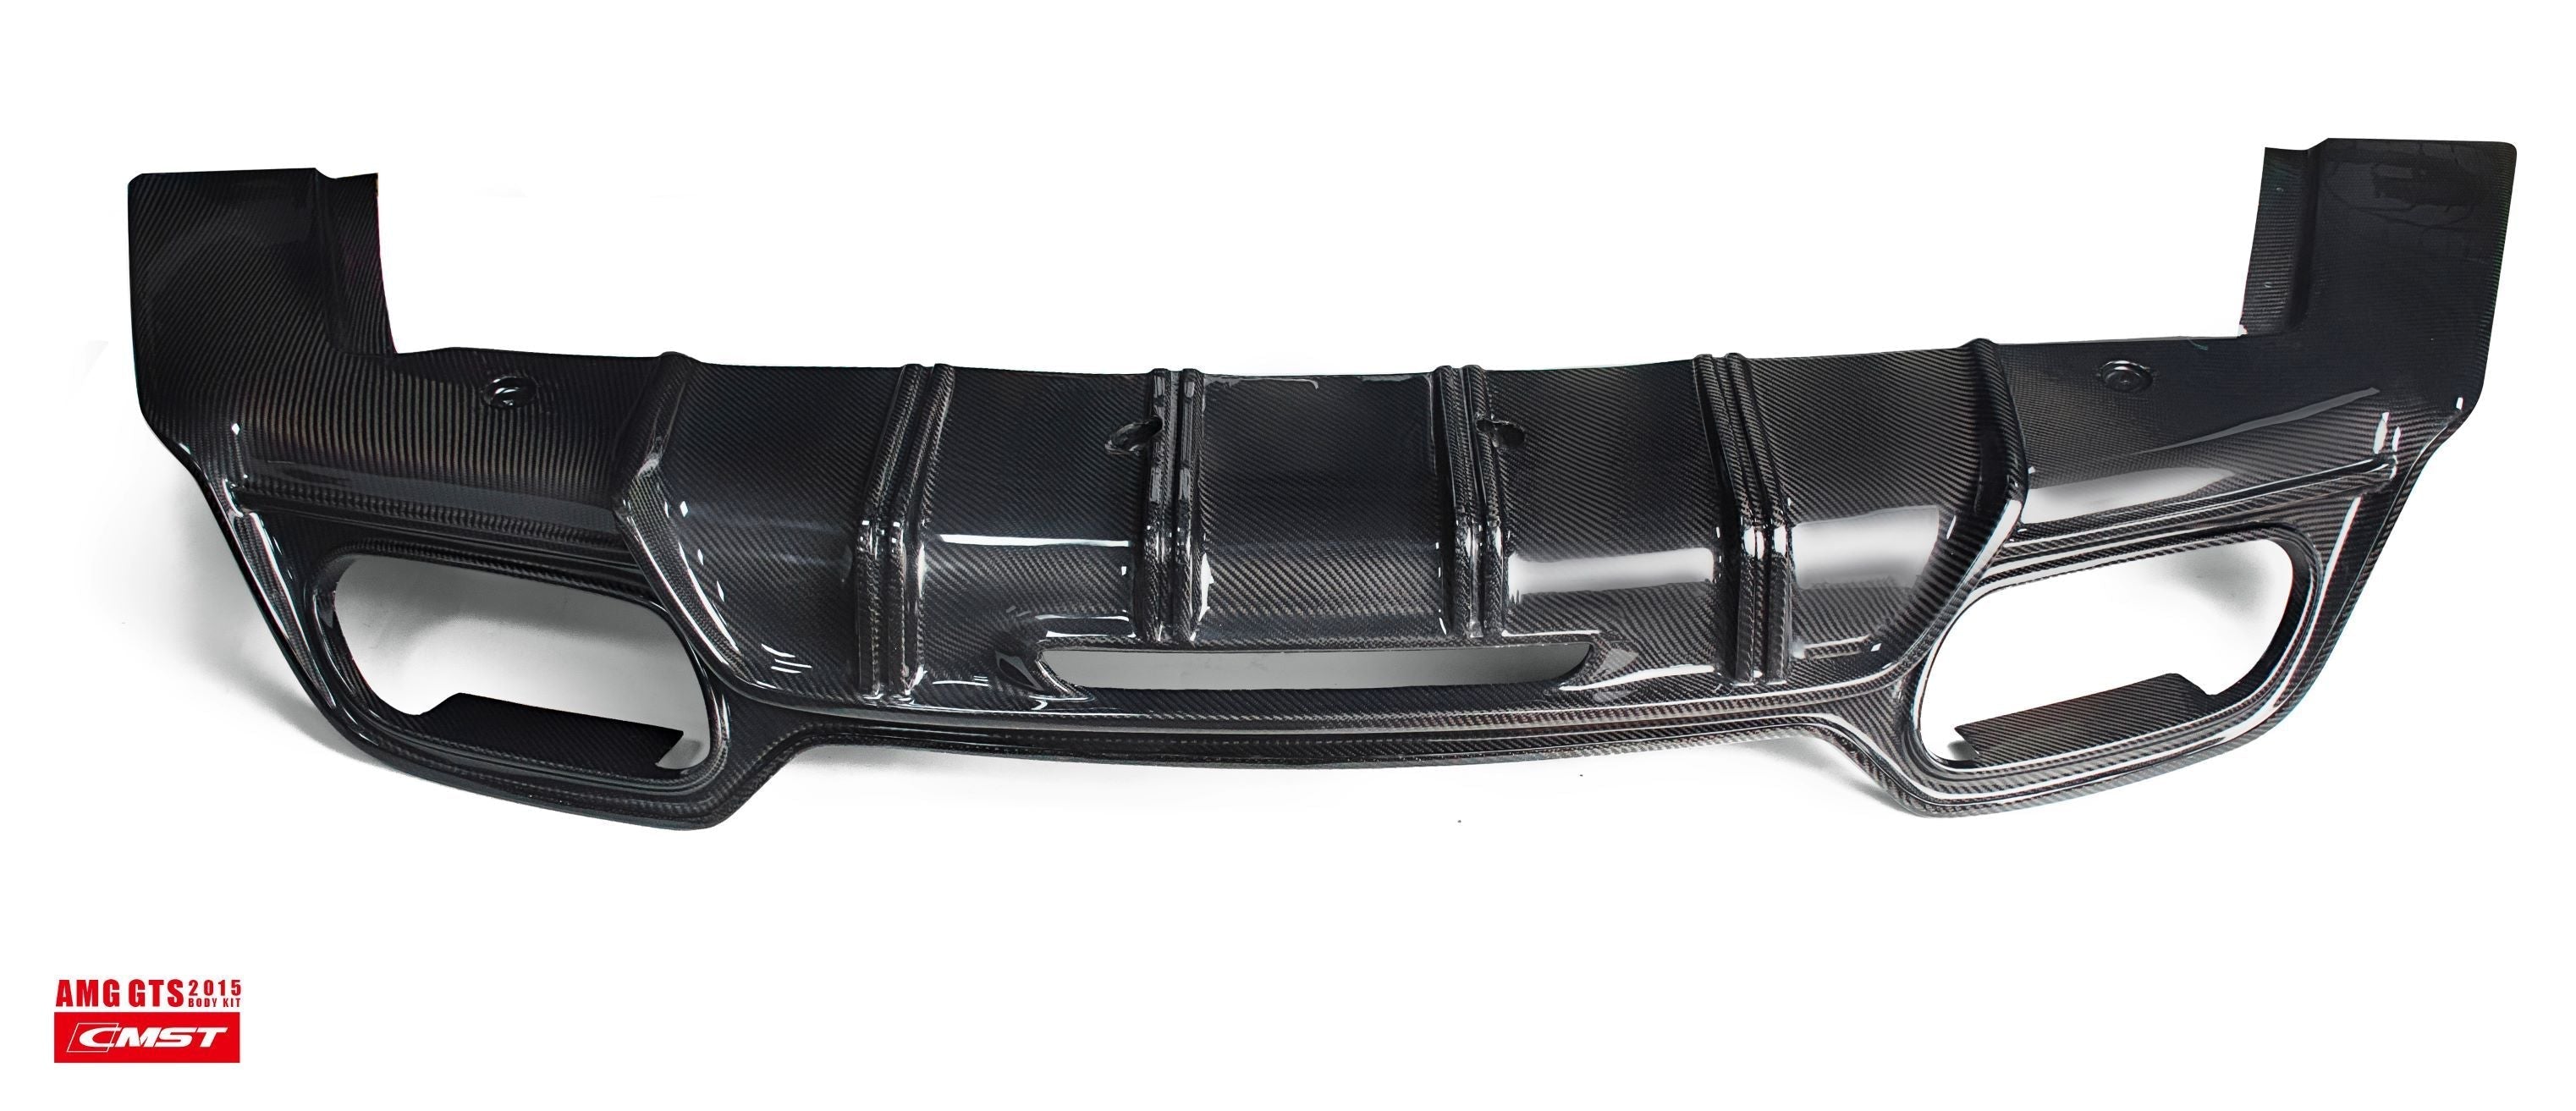 CMST Tuning Carbon Fiber Rear Diffuser for Mercedes Benz C190 AMG GT GTS 2015-ON-3